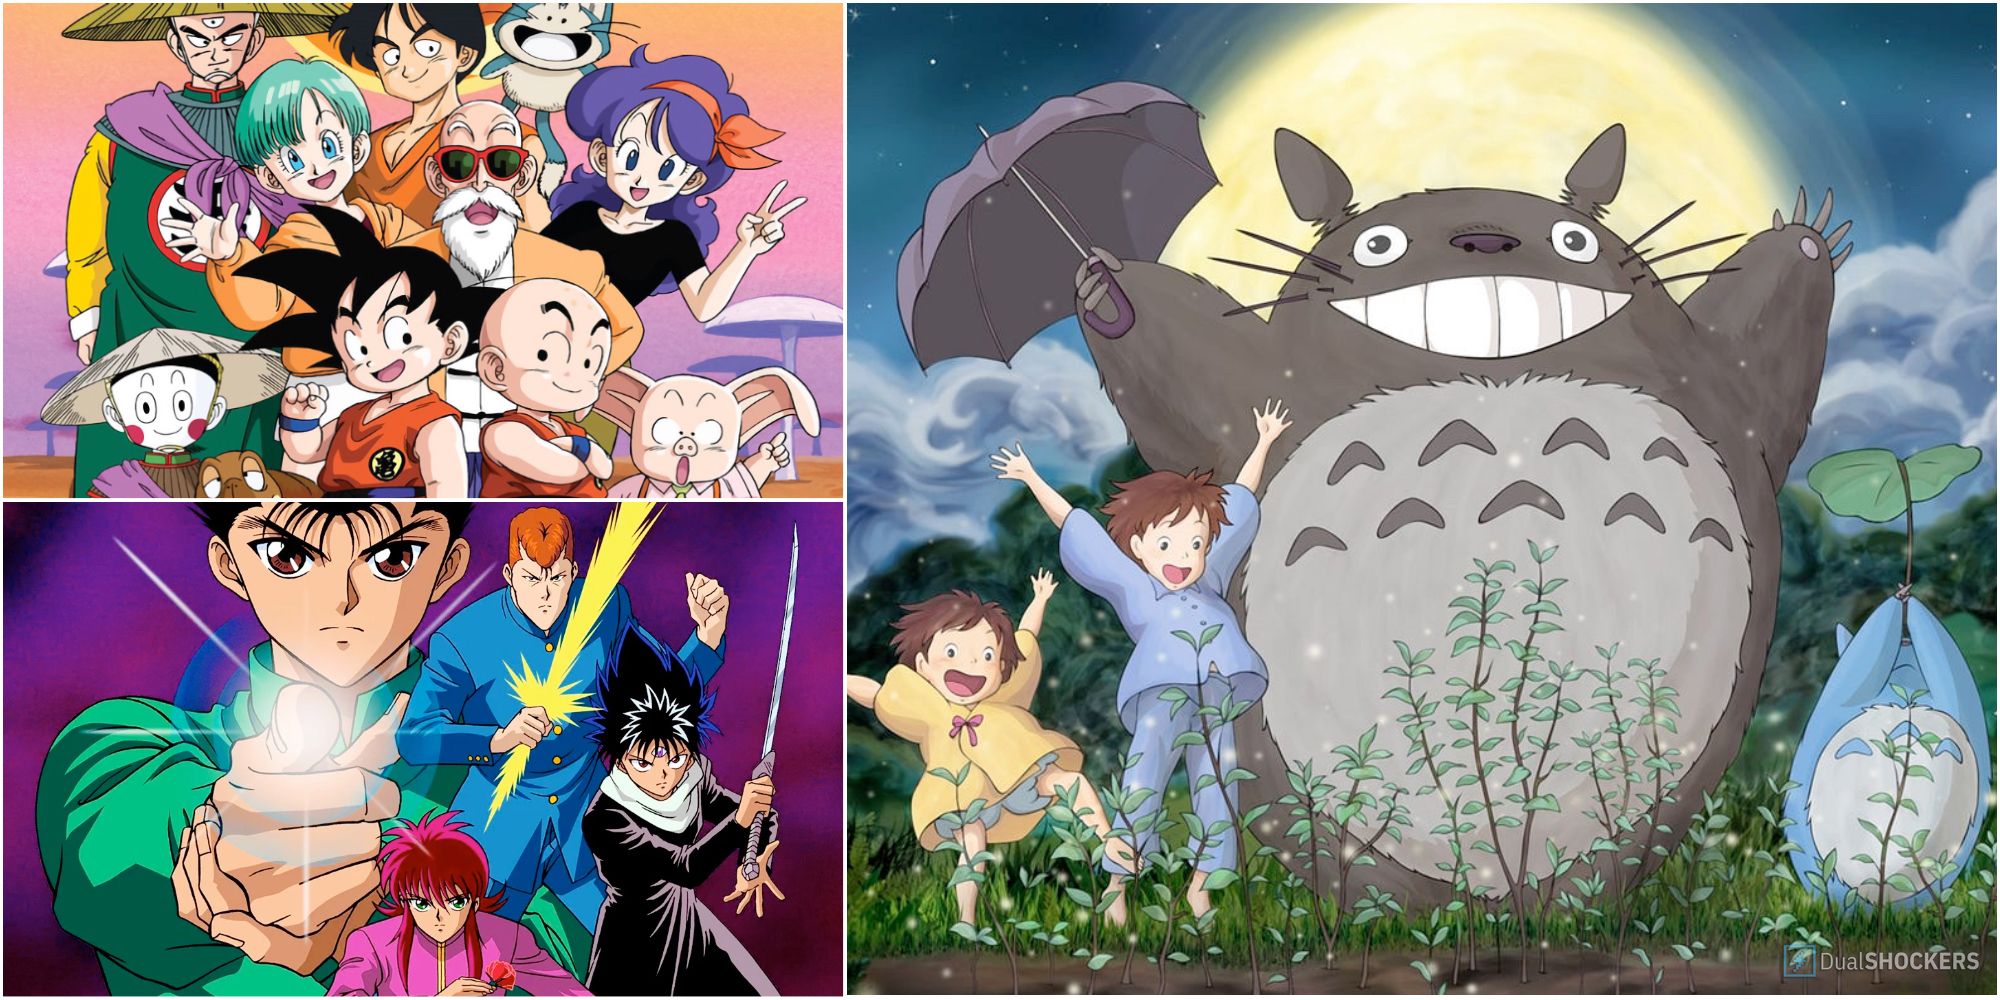 Forgotten 2000's: The Anime Classics of Your Childhood